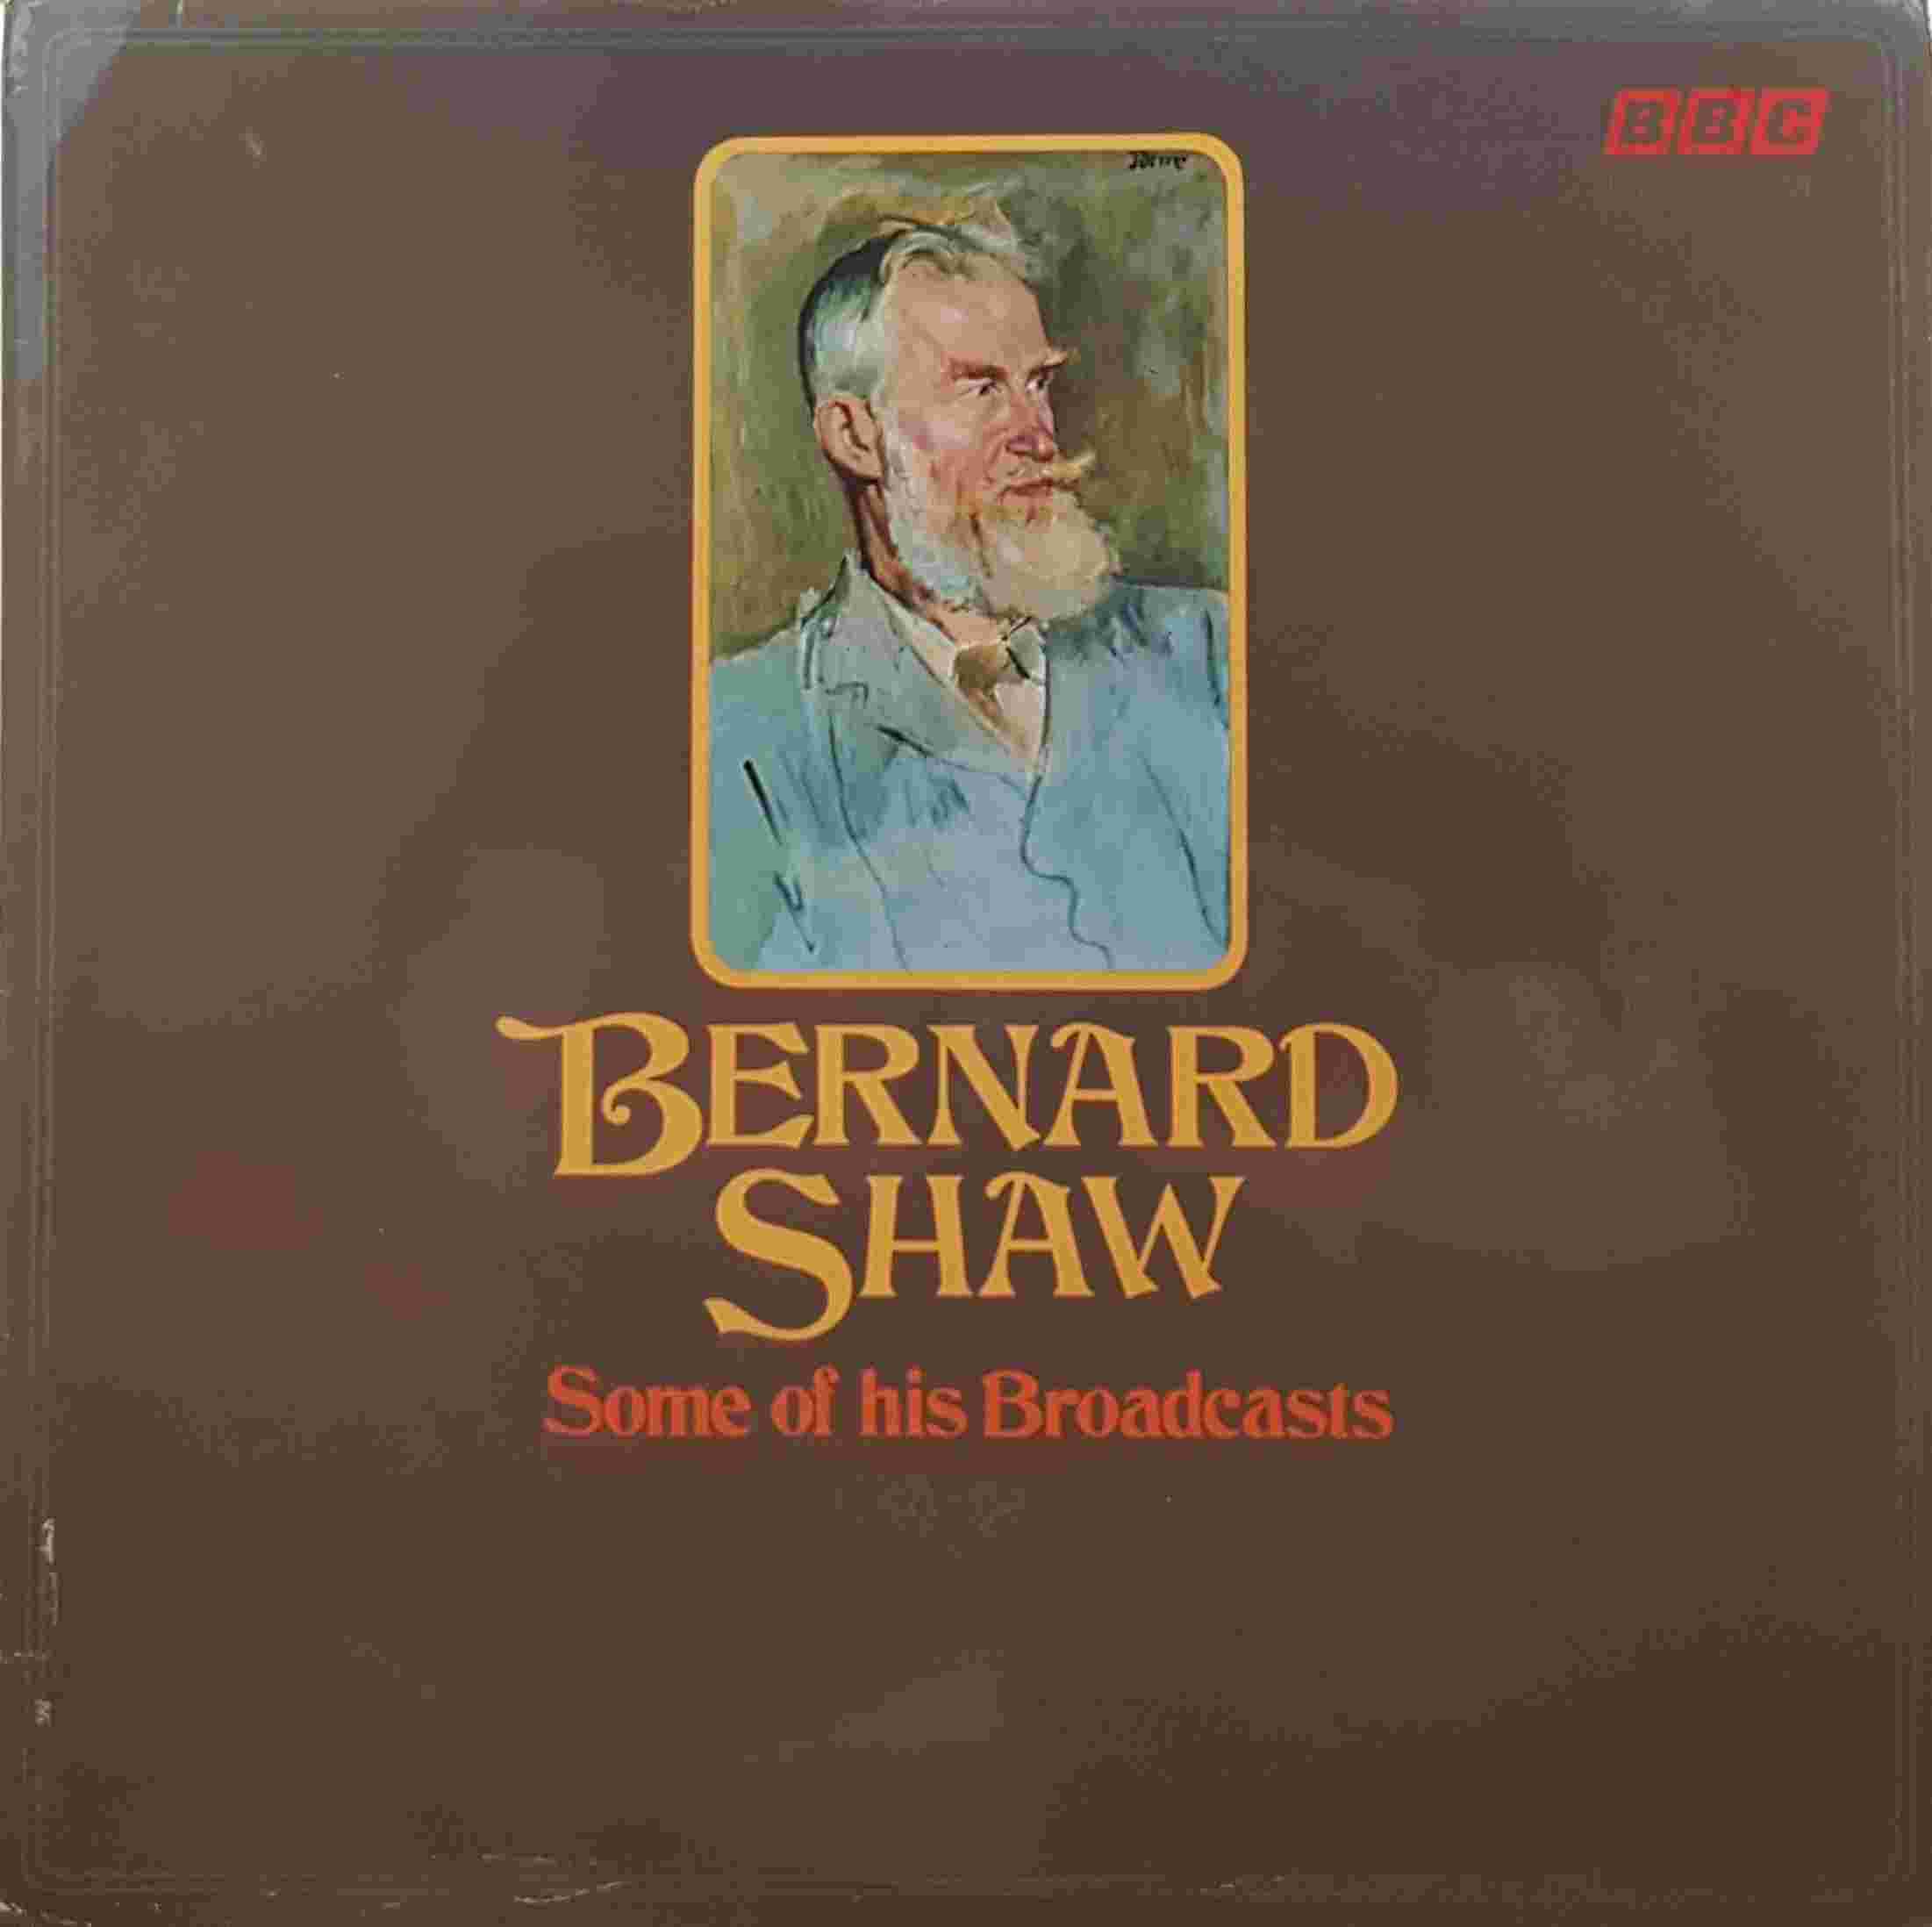 Picture of REB 32 Bernard Shaw 1856 - 1950 by artist Bernard Shaw from the BBC albums - Records and Tapes library